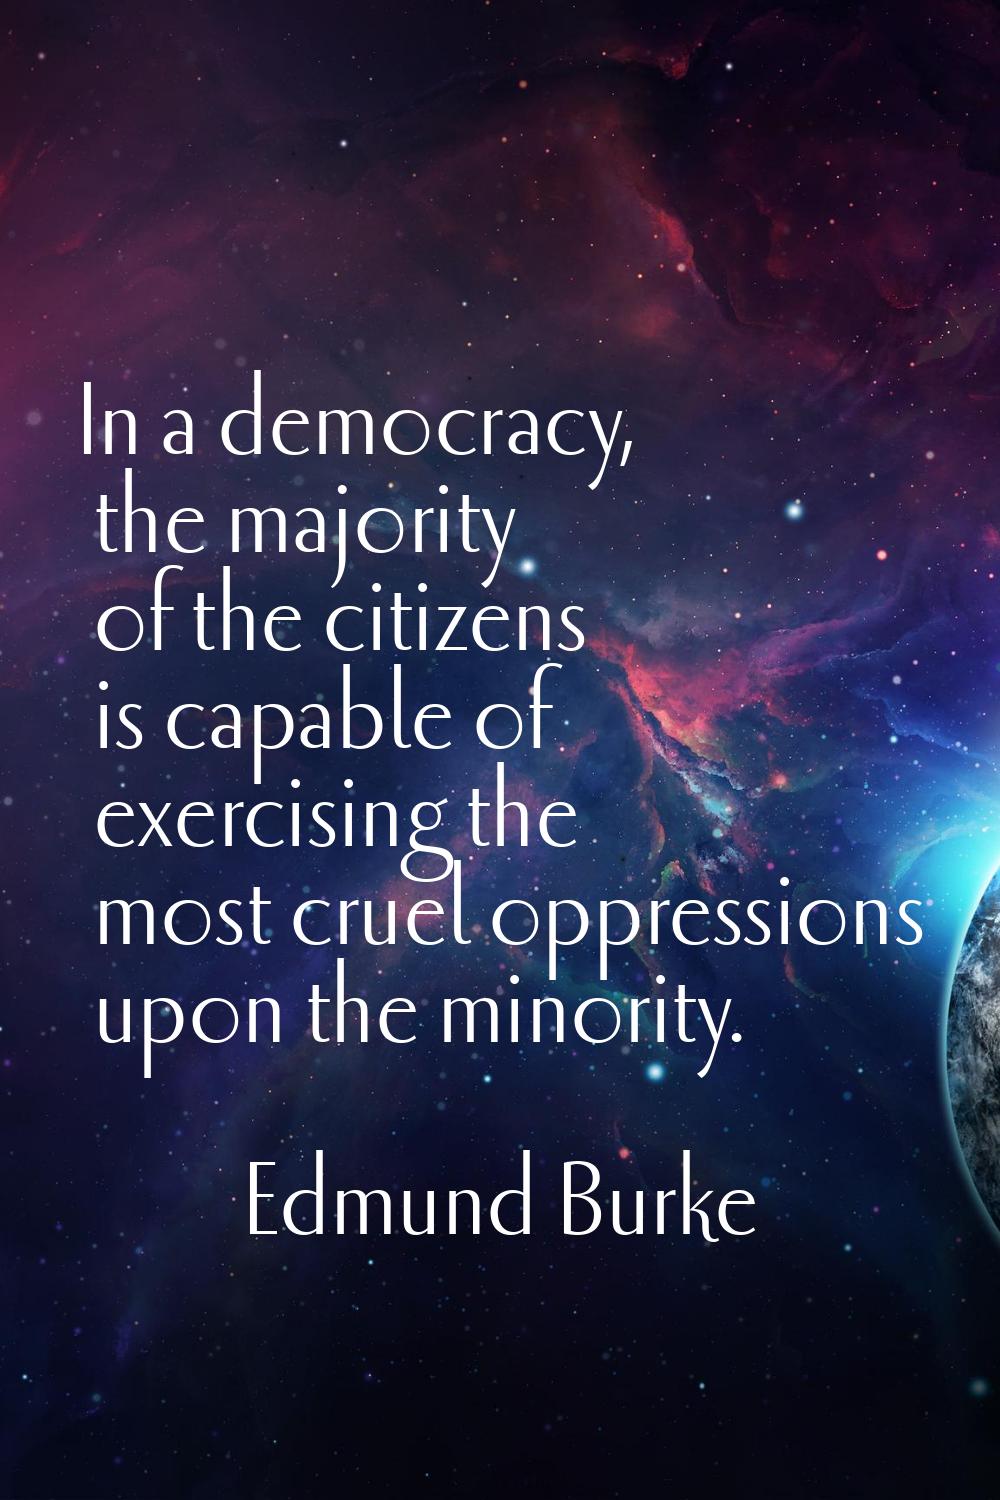 In a democracy, the majority of the citizens is capable of exercising the most cruel oppressions up